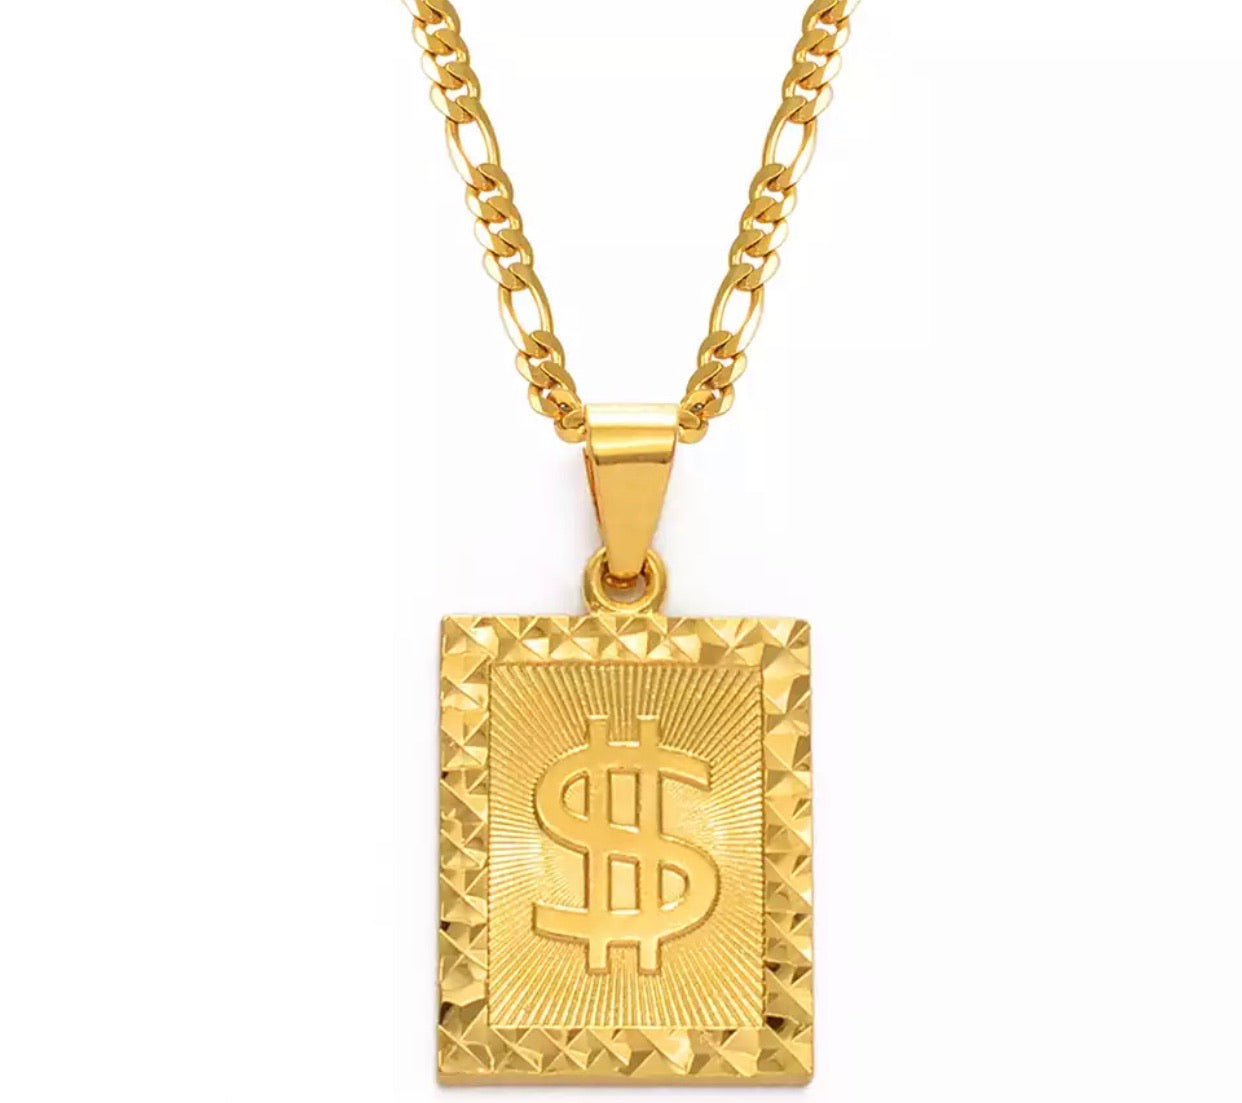 MONEY LONG NECKLACE - Bling Ting